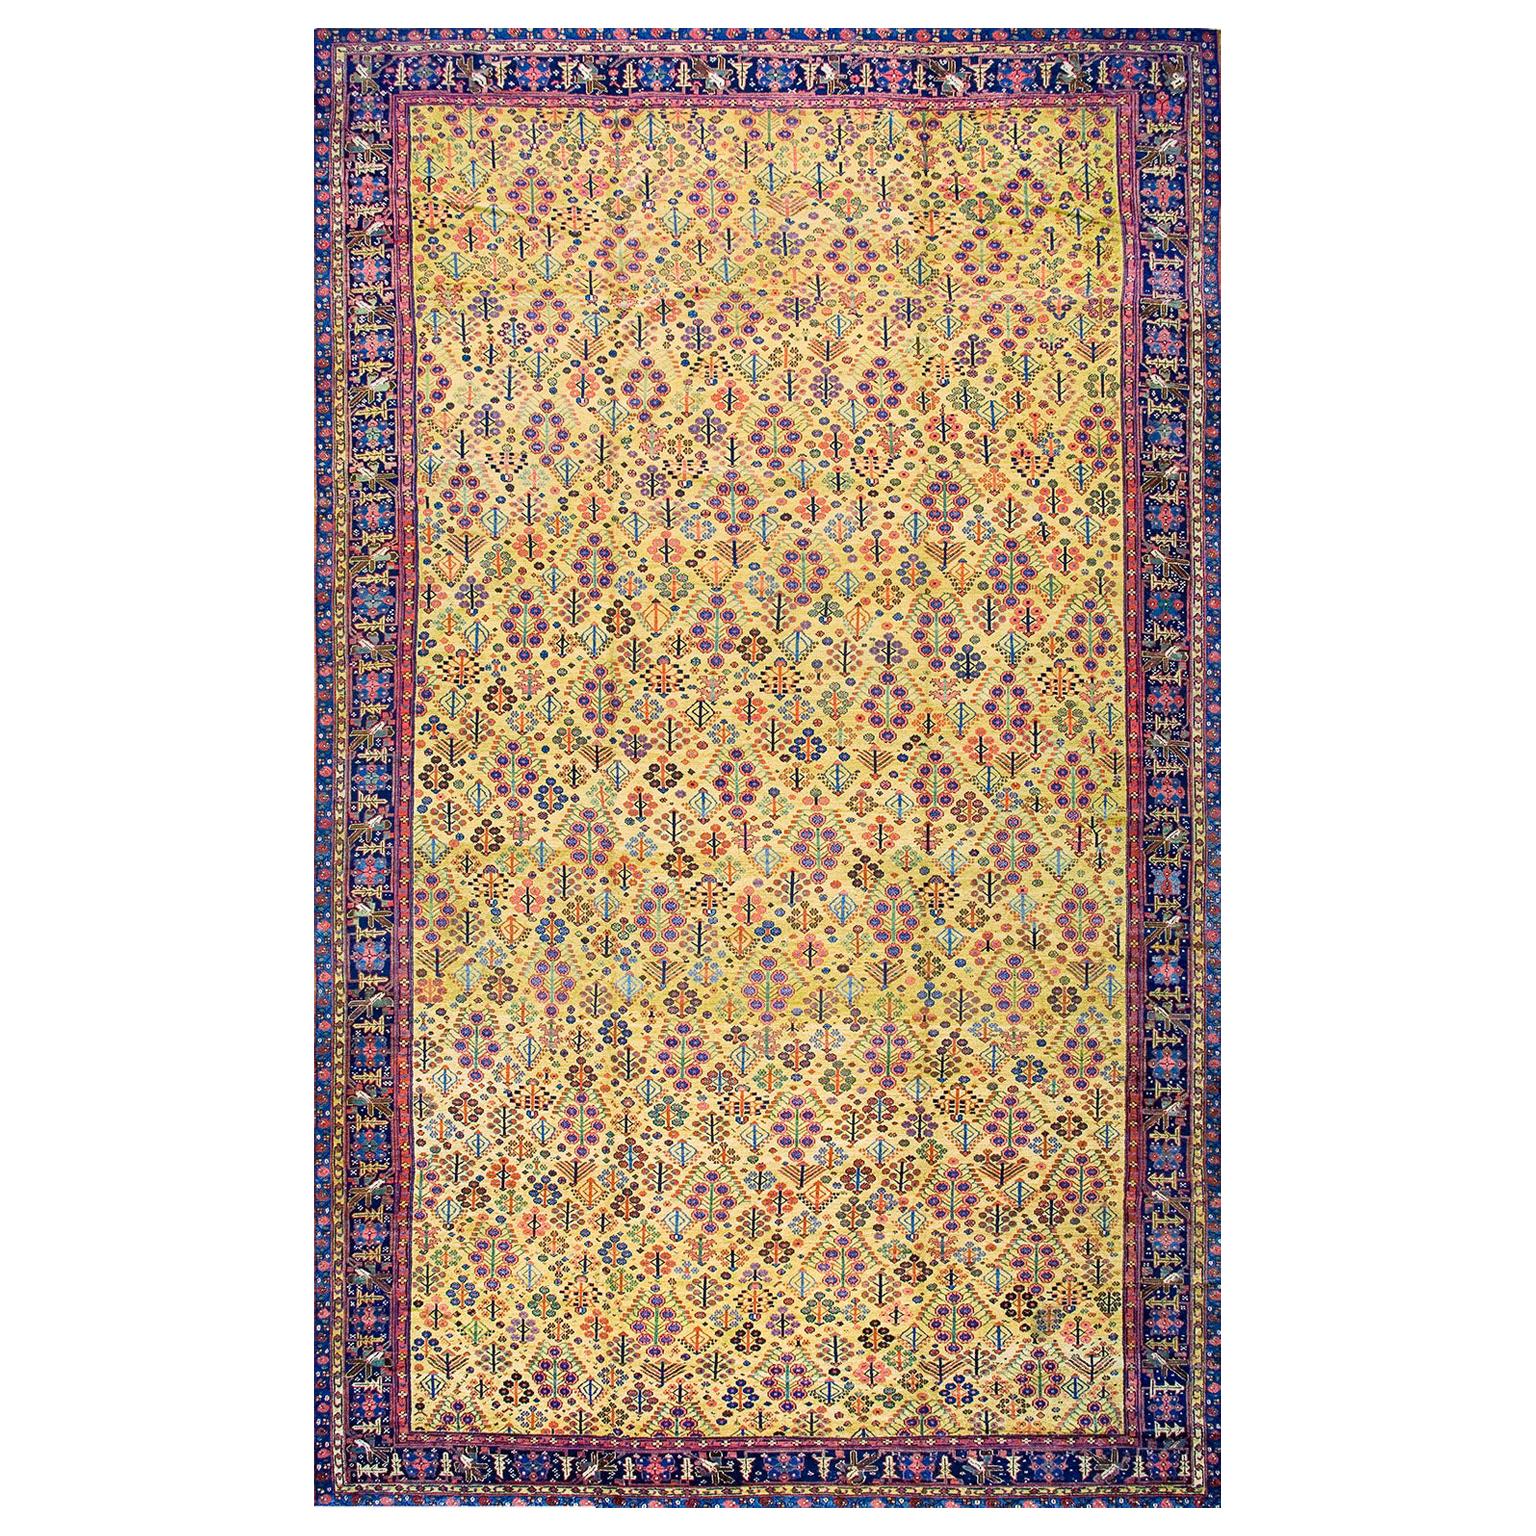 Mid 19th Century NW Persian Carpet ( 12'2" x 20'8" - 370 x 630 cm ) For Sale